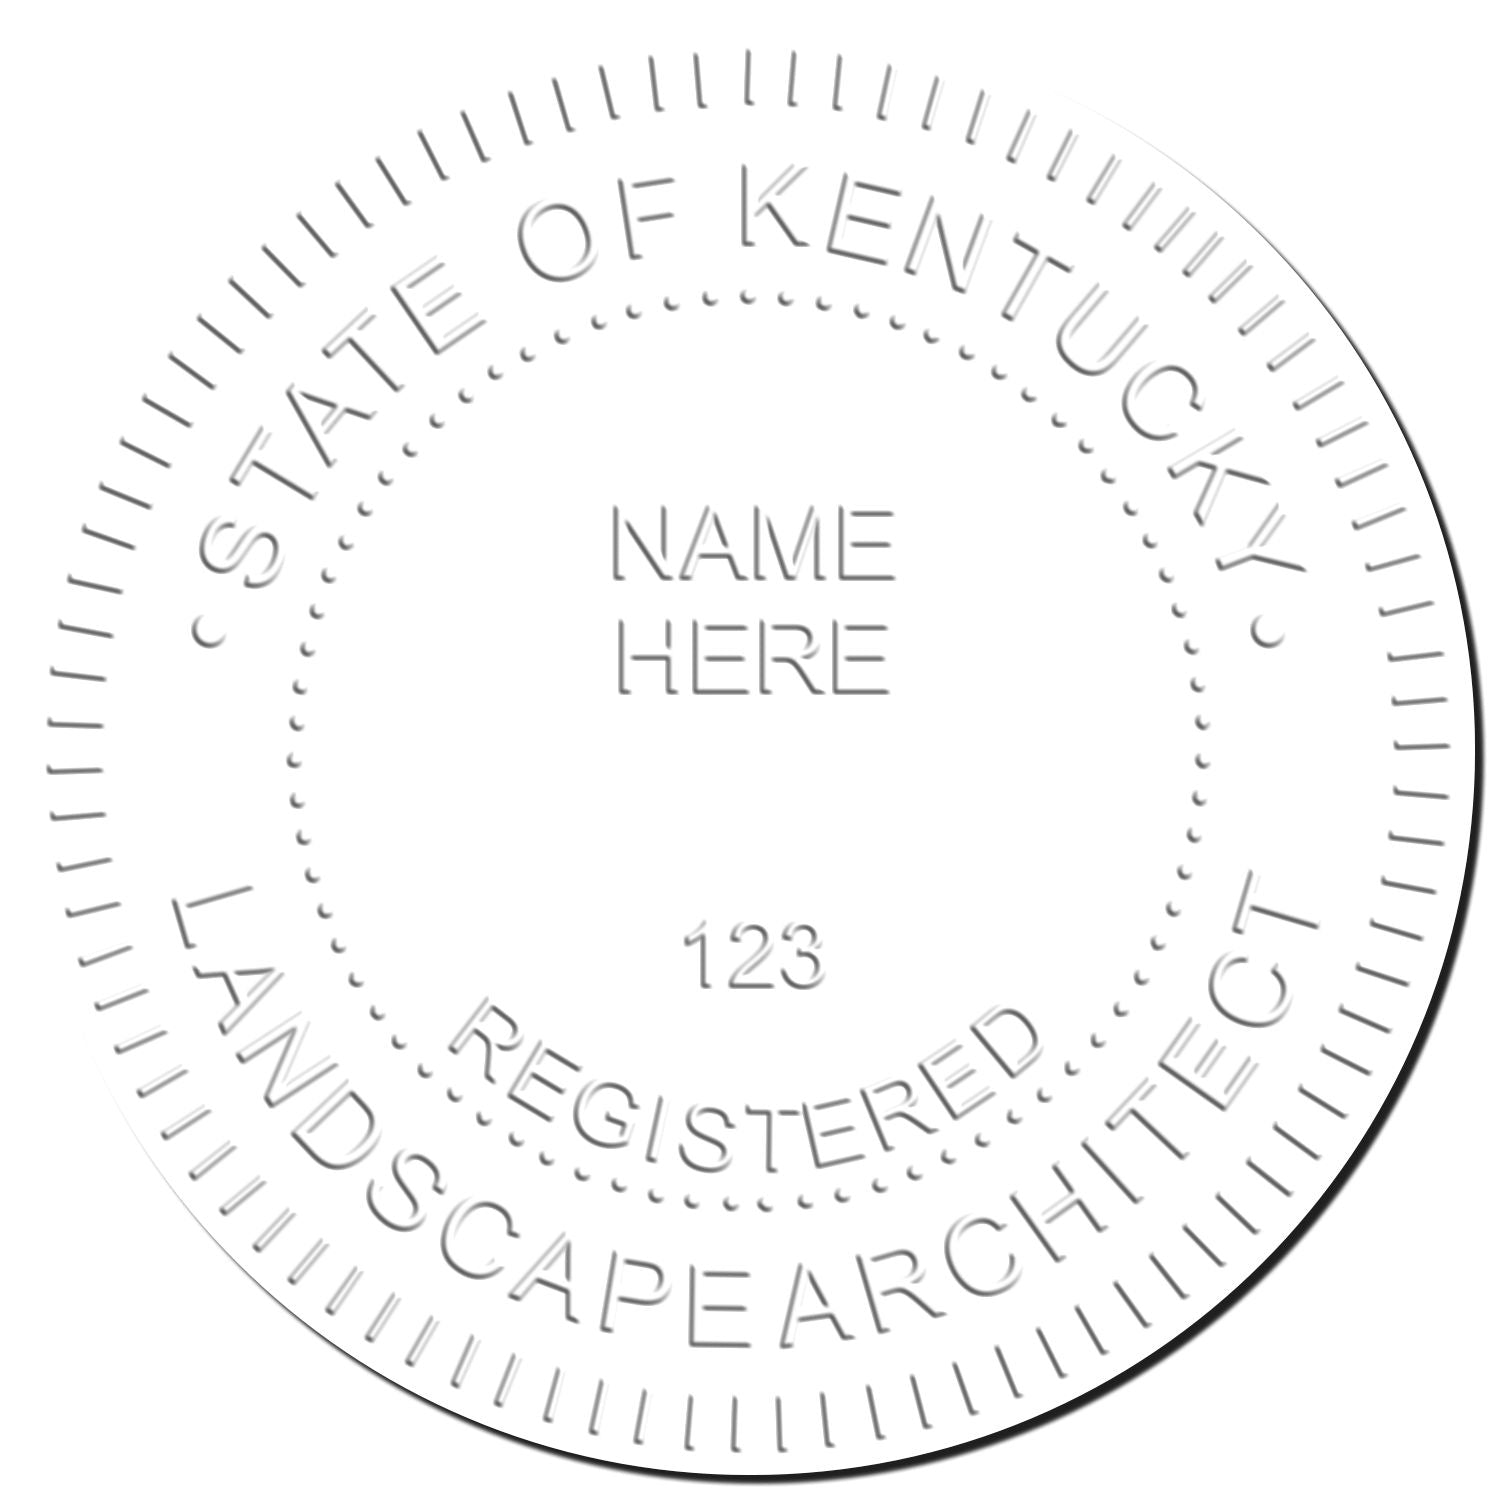 This paper is stamped with a sample imprint of the State of Kentucky Extended Long Reach Landscape Architect Seal Embosser, signifying its quality and reliability.